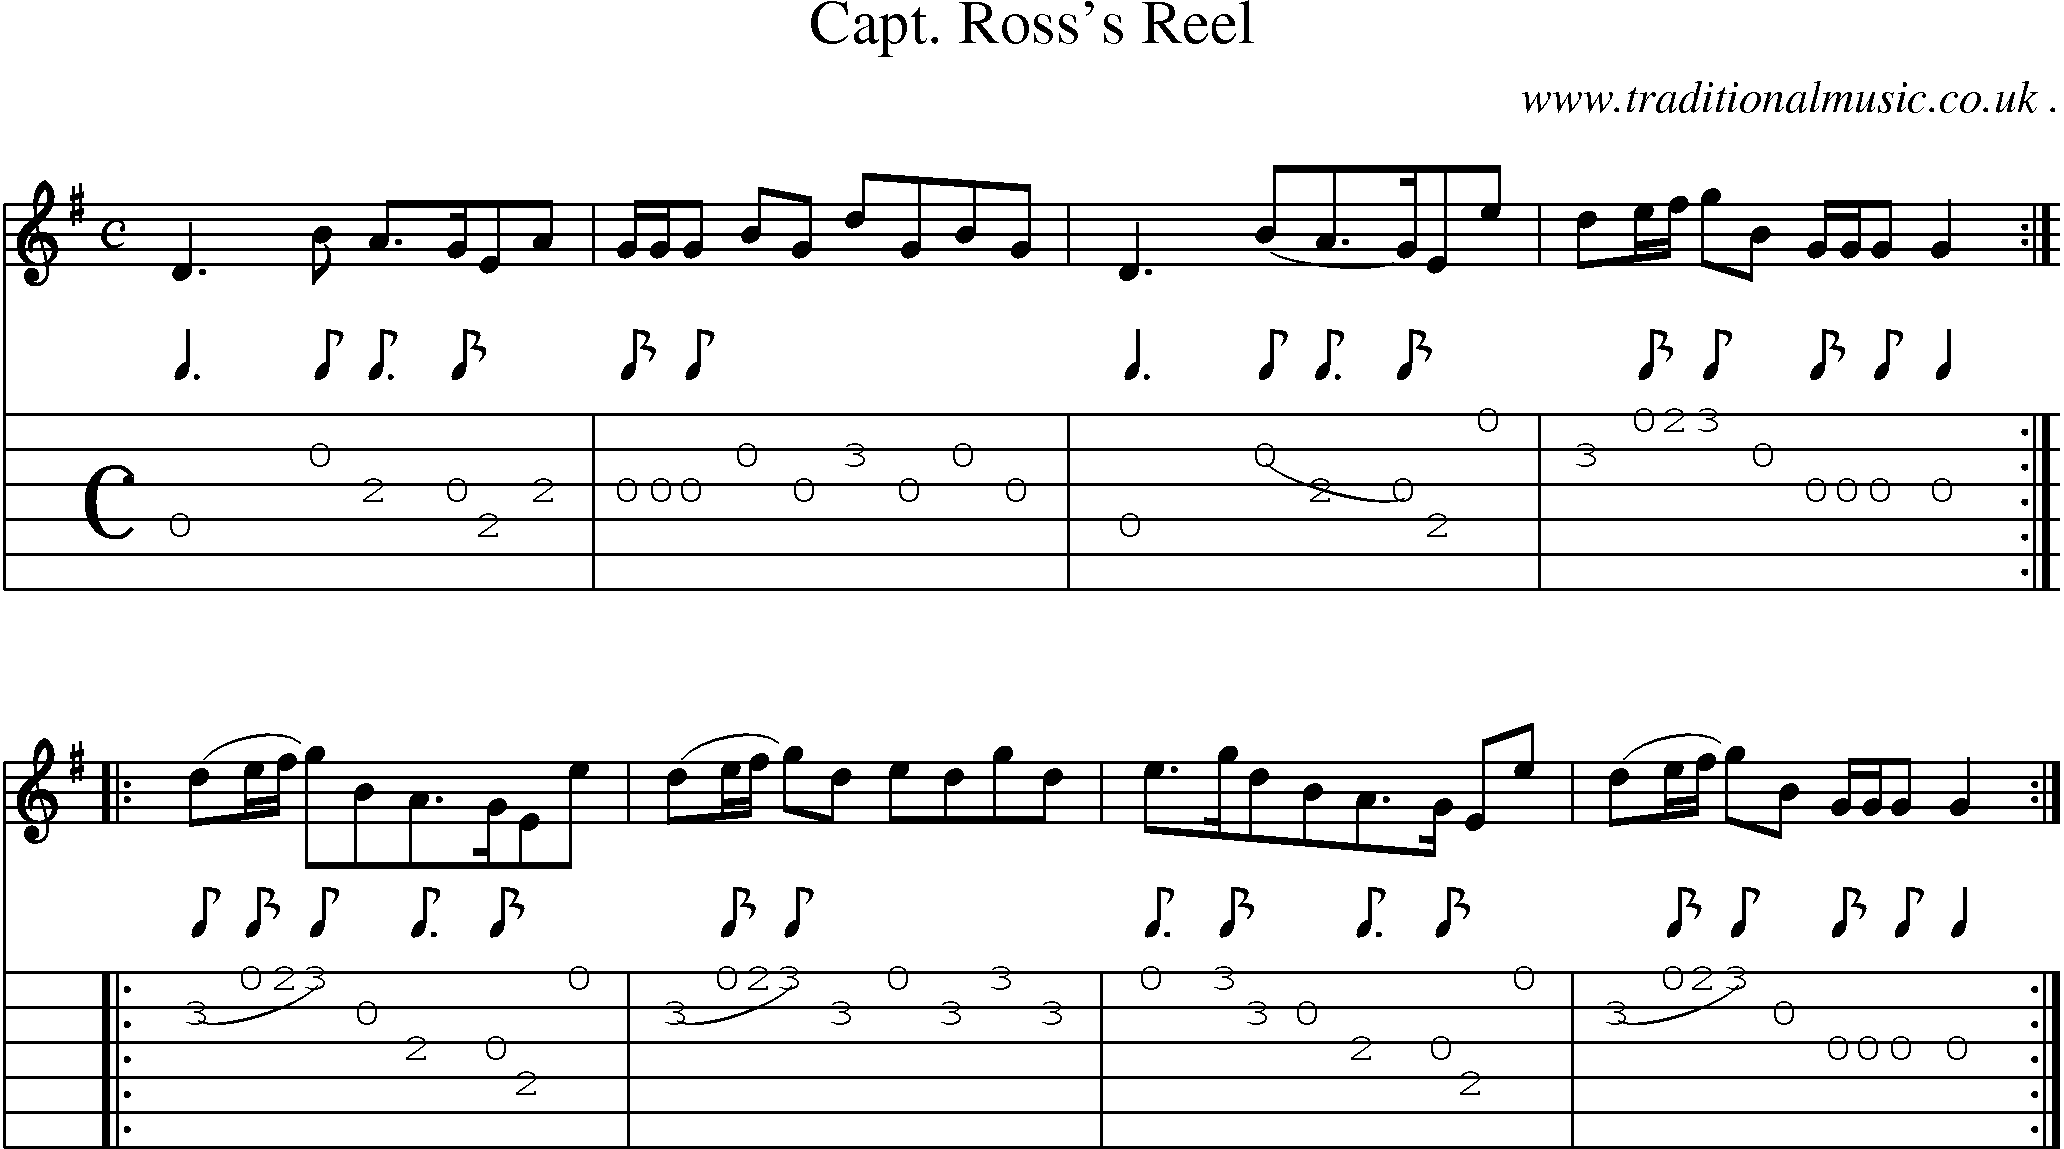 Sheet-Music and Guitar Tabs for Capt Rosss Reel